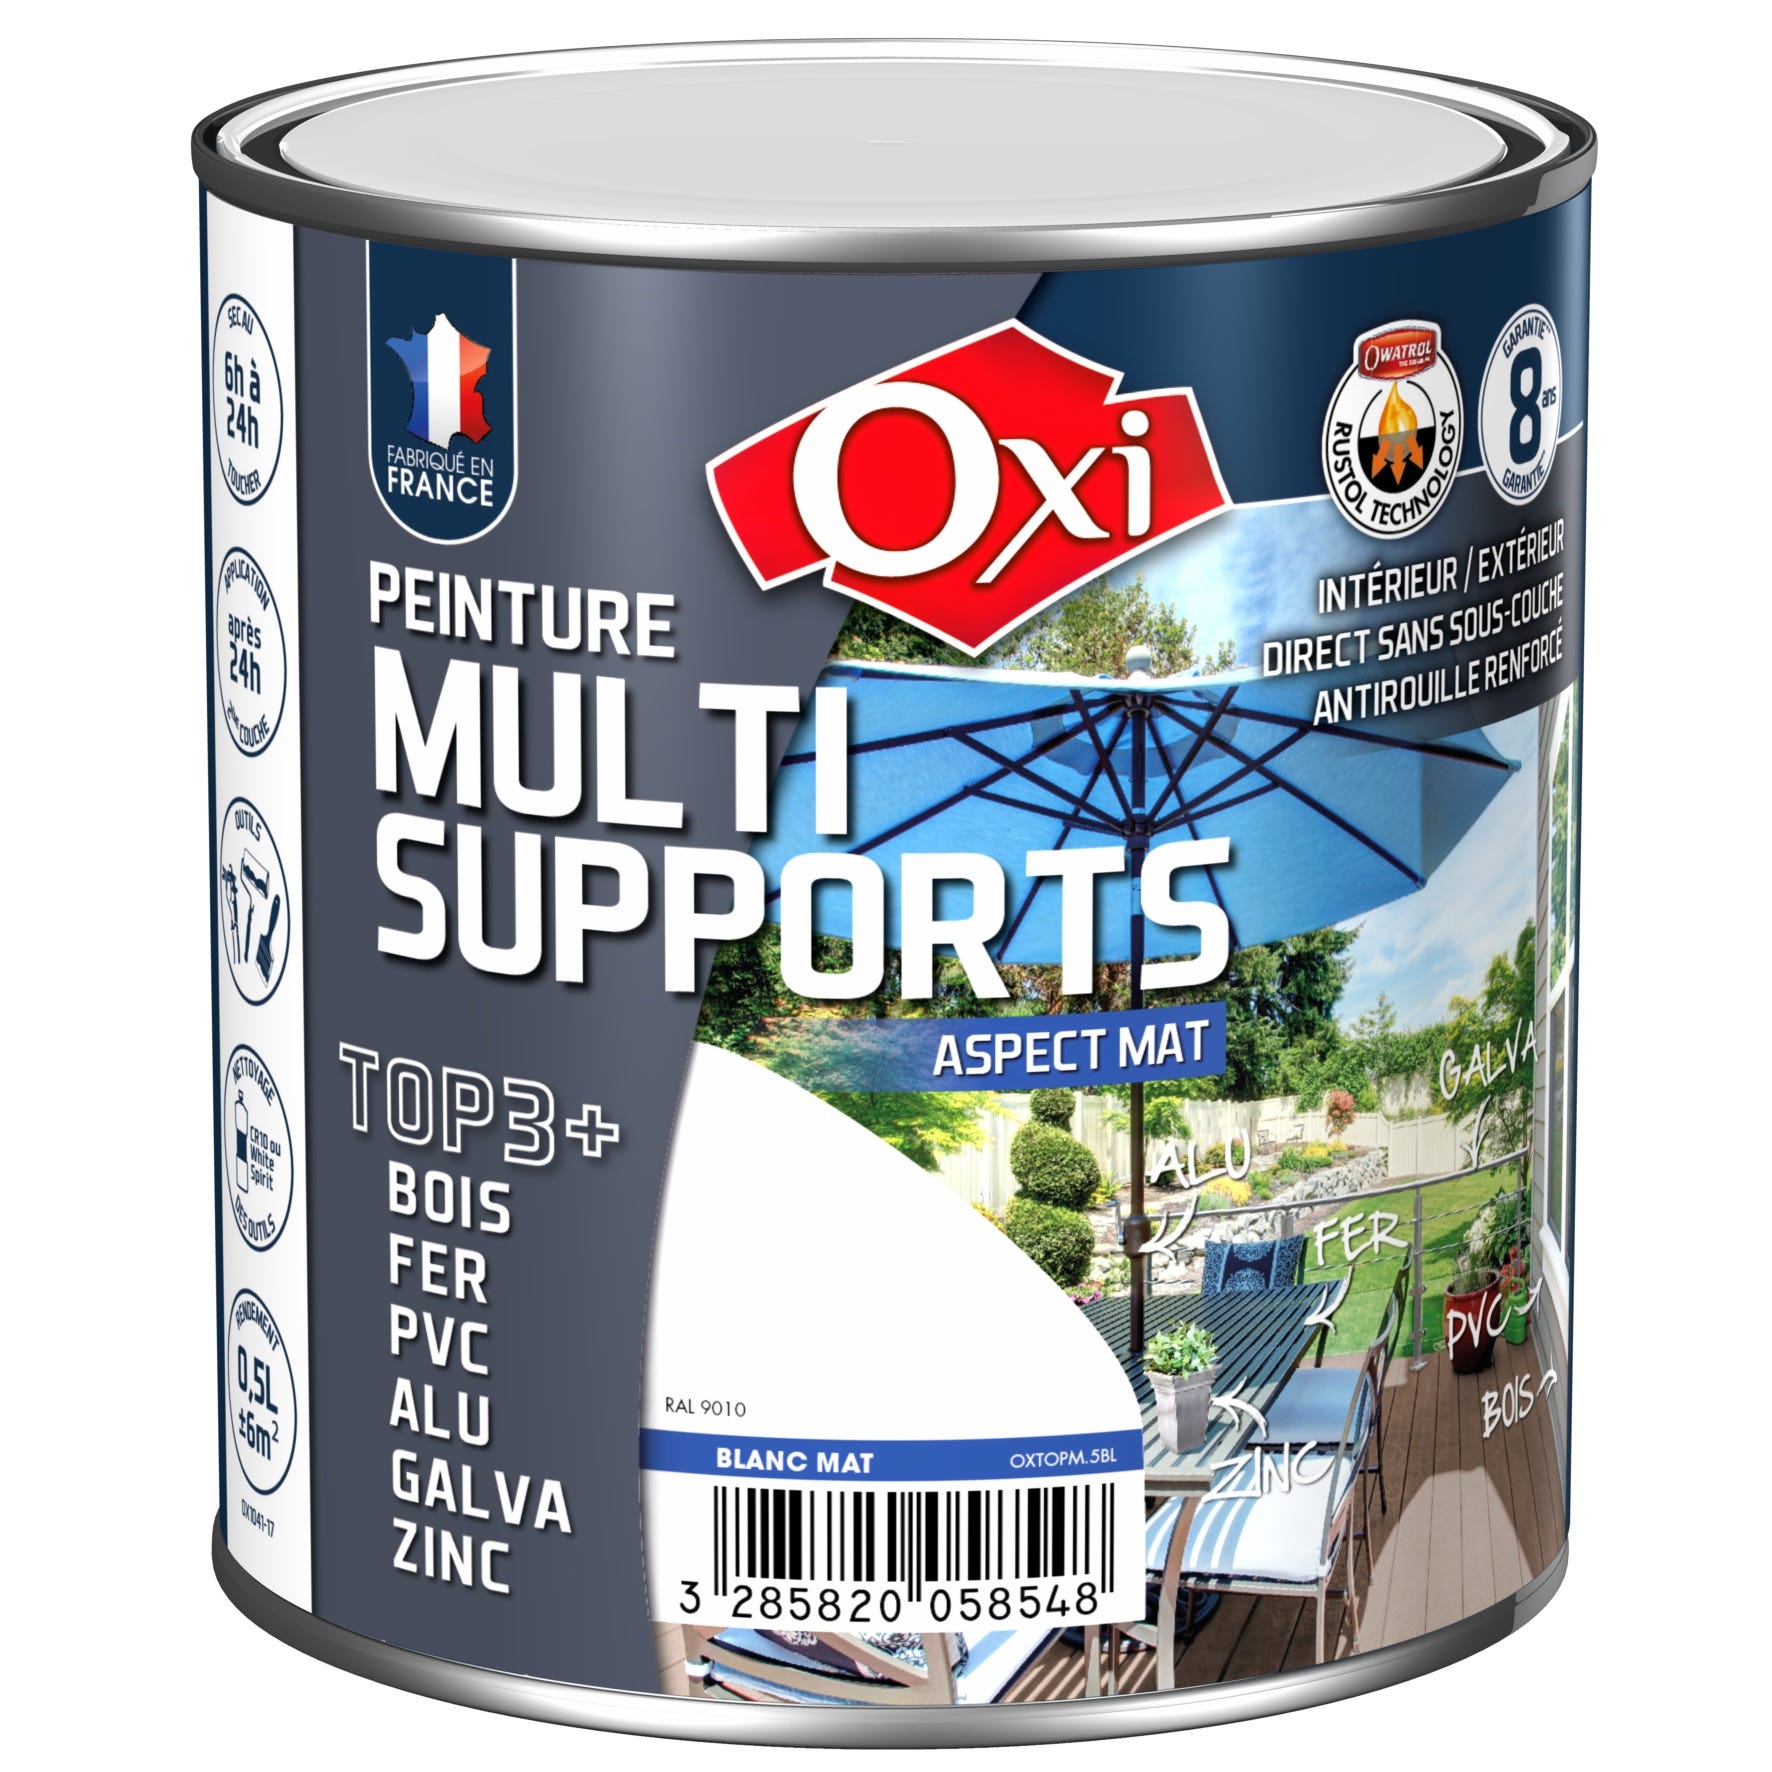 Top 3 Multi Supports Owatrol PEINTURE MULTI SUPPORTS MAT Gris Beige (RAL 7006) 0.5 litre 0